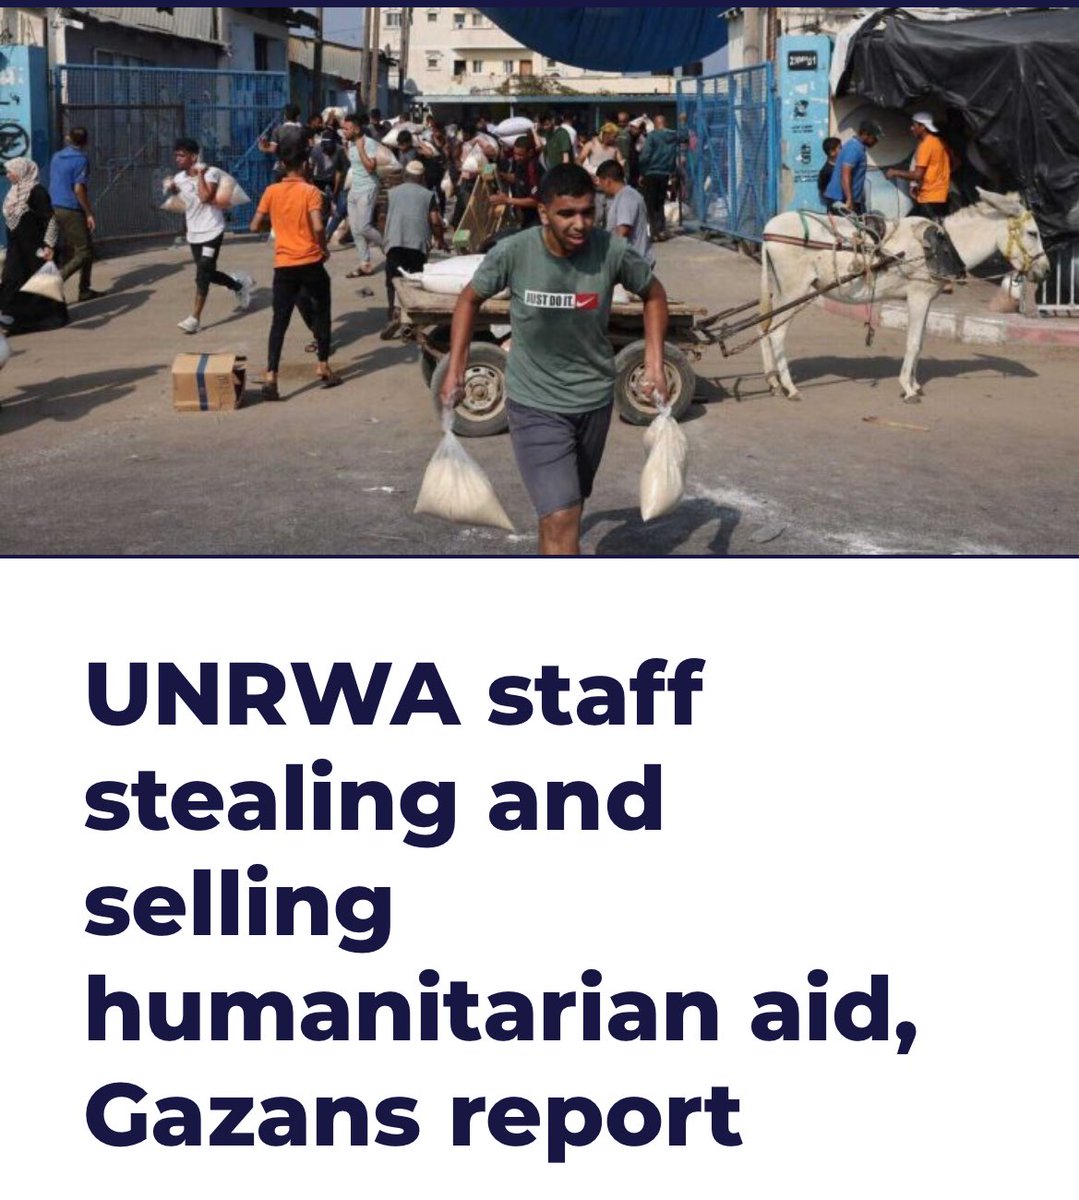 UNRWA staff are stealing aid and selling it for profit, while those who report it face reprisals, according to numerous reports published by Palestinians in an @UNRWA-related chatroom. unwatch.org/unrwa-staff-st…